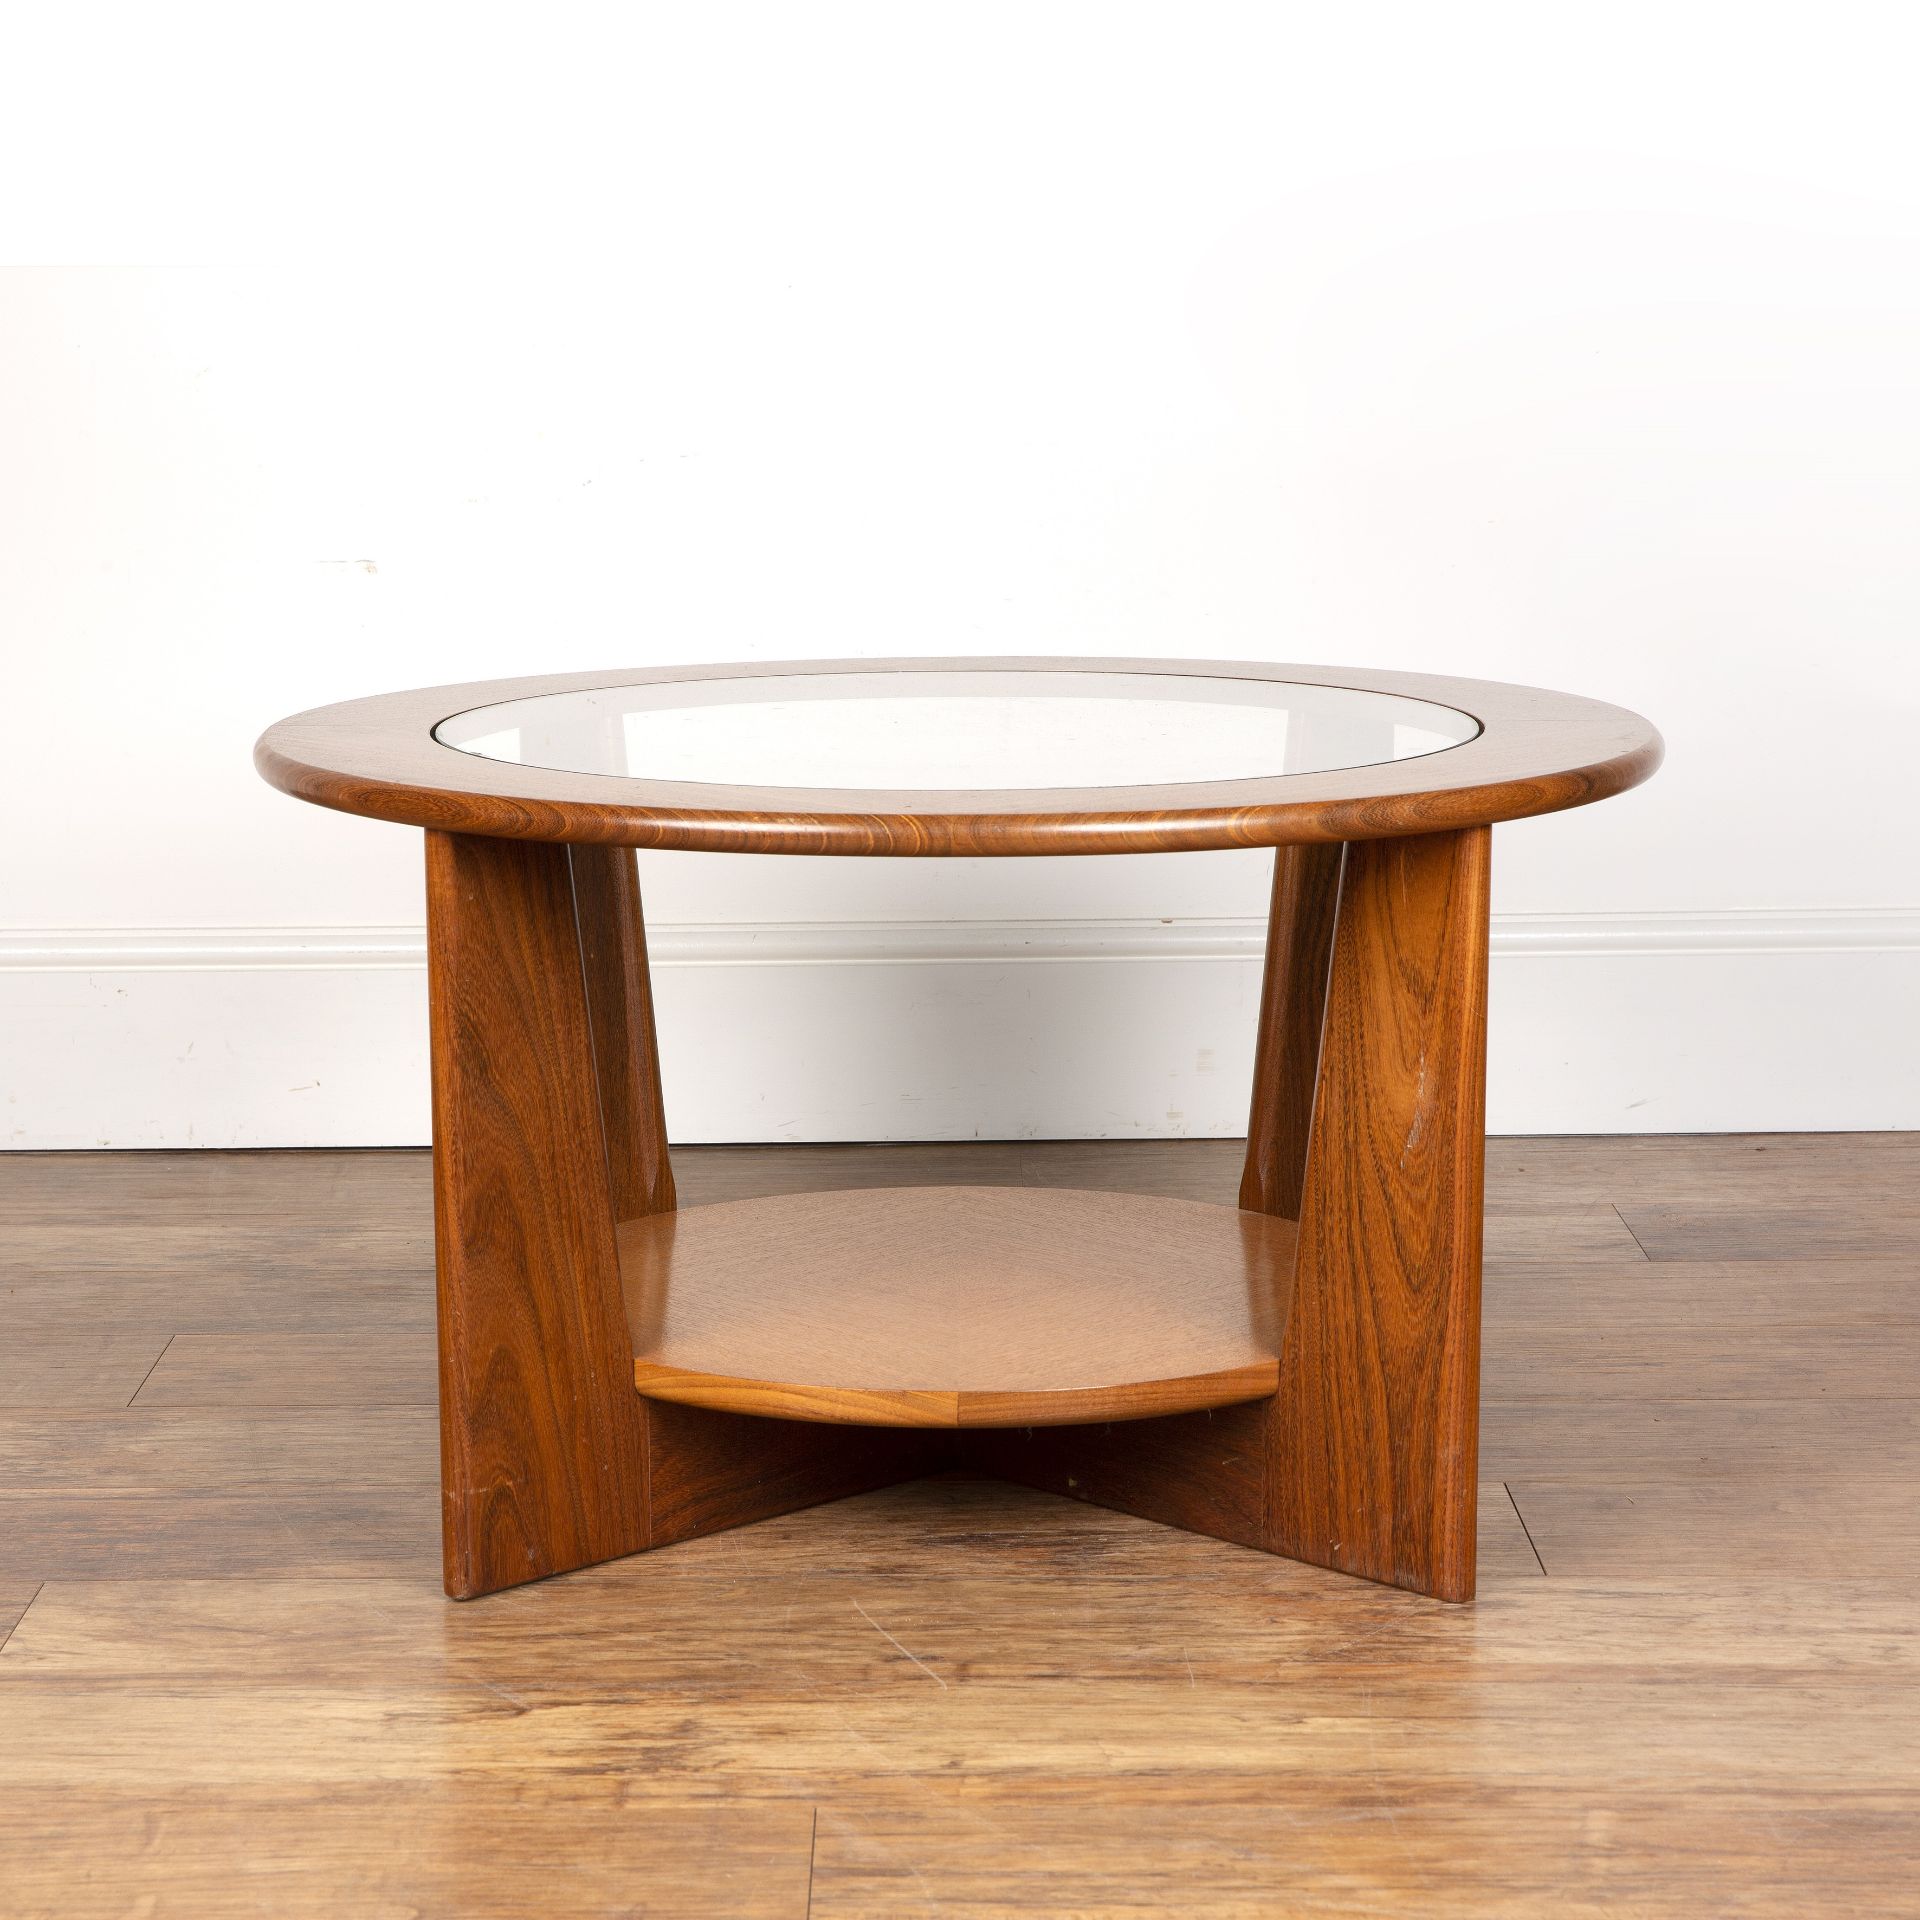 Attributed to G-plan teak, circular coffee table with glass inset top, unmarked, 77.5cm wide x - Image 4 of 5